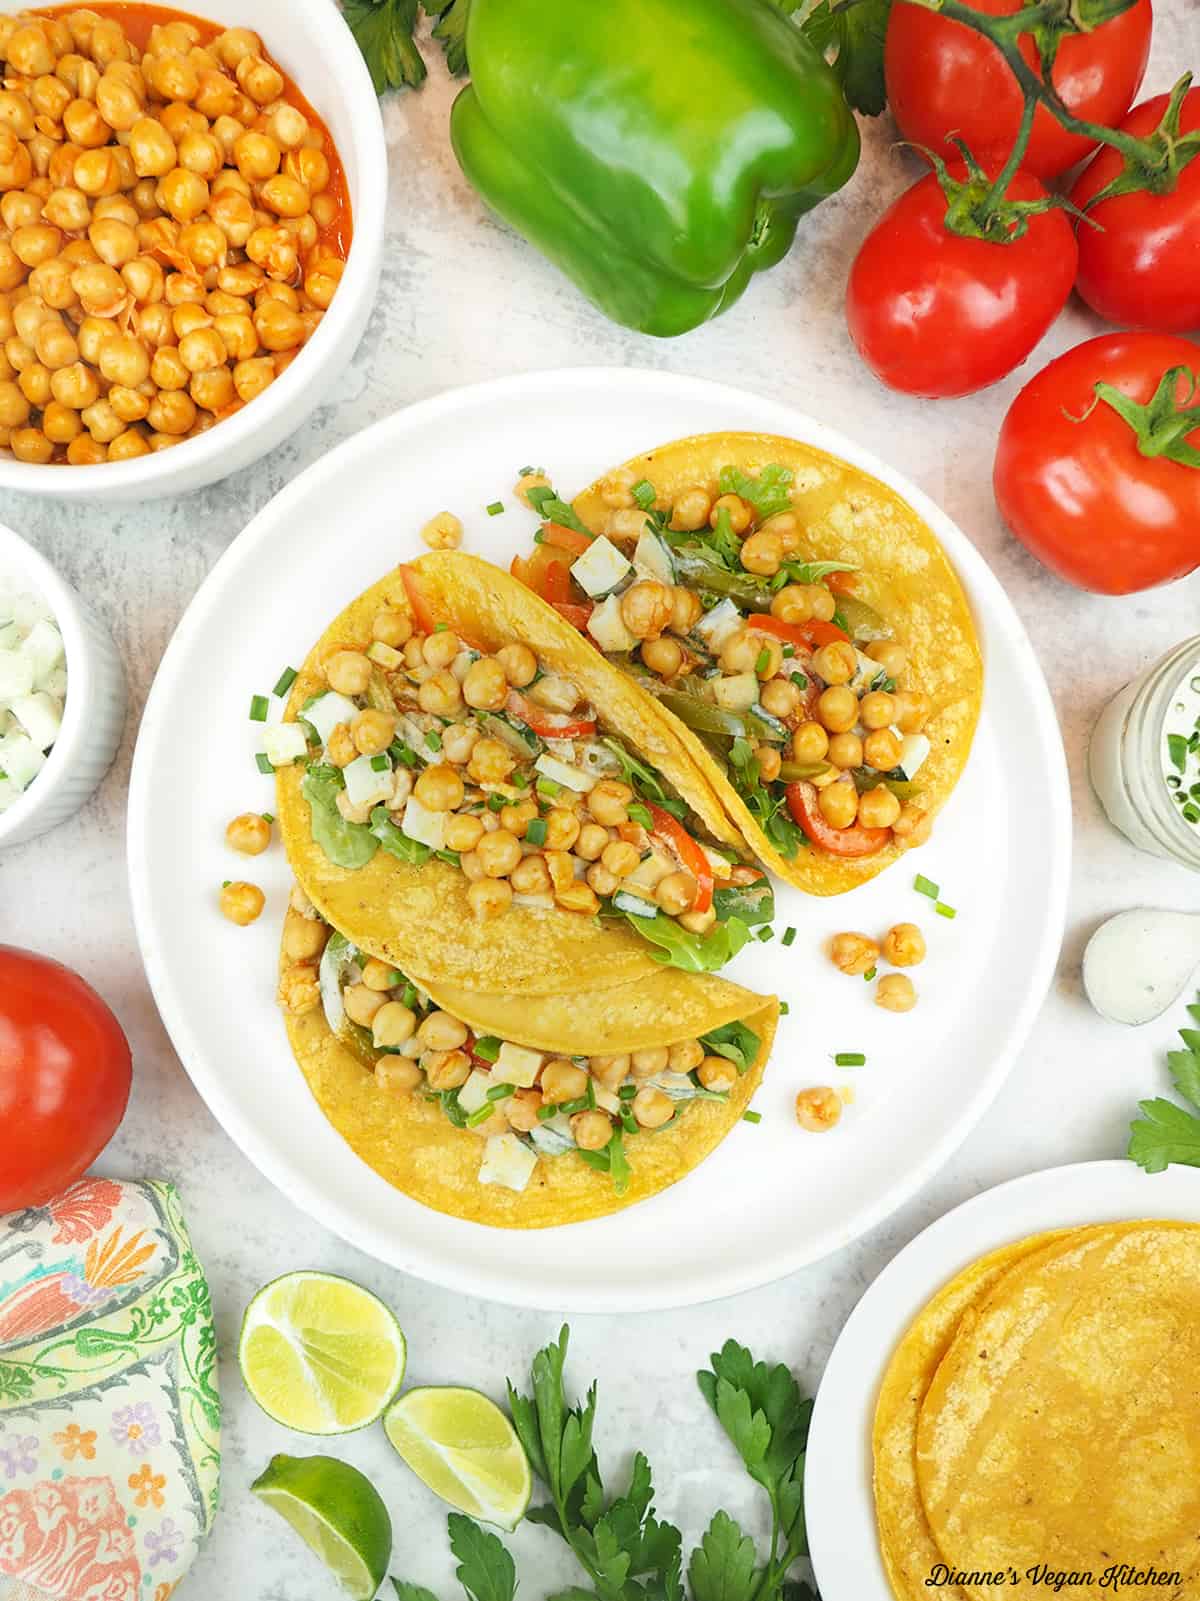 plate of tacos with tomatoes, peppers, buffalo chickpeas, cucumber ranch, lemons, and tortillas,